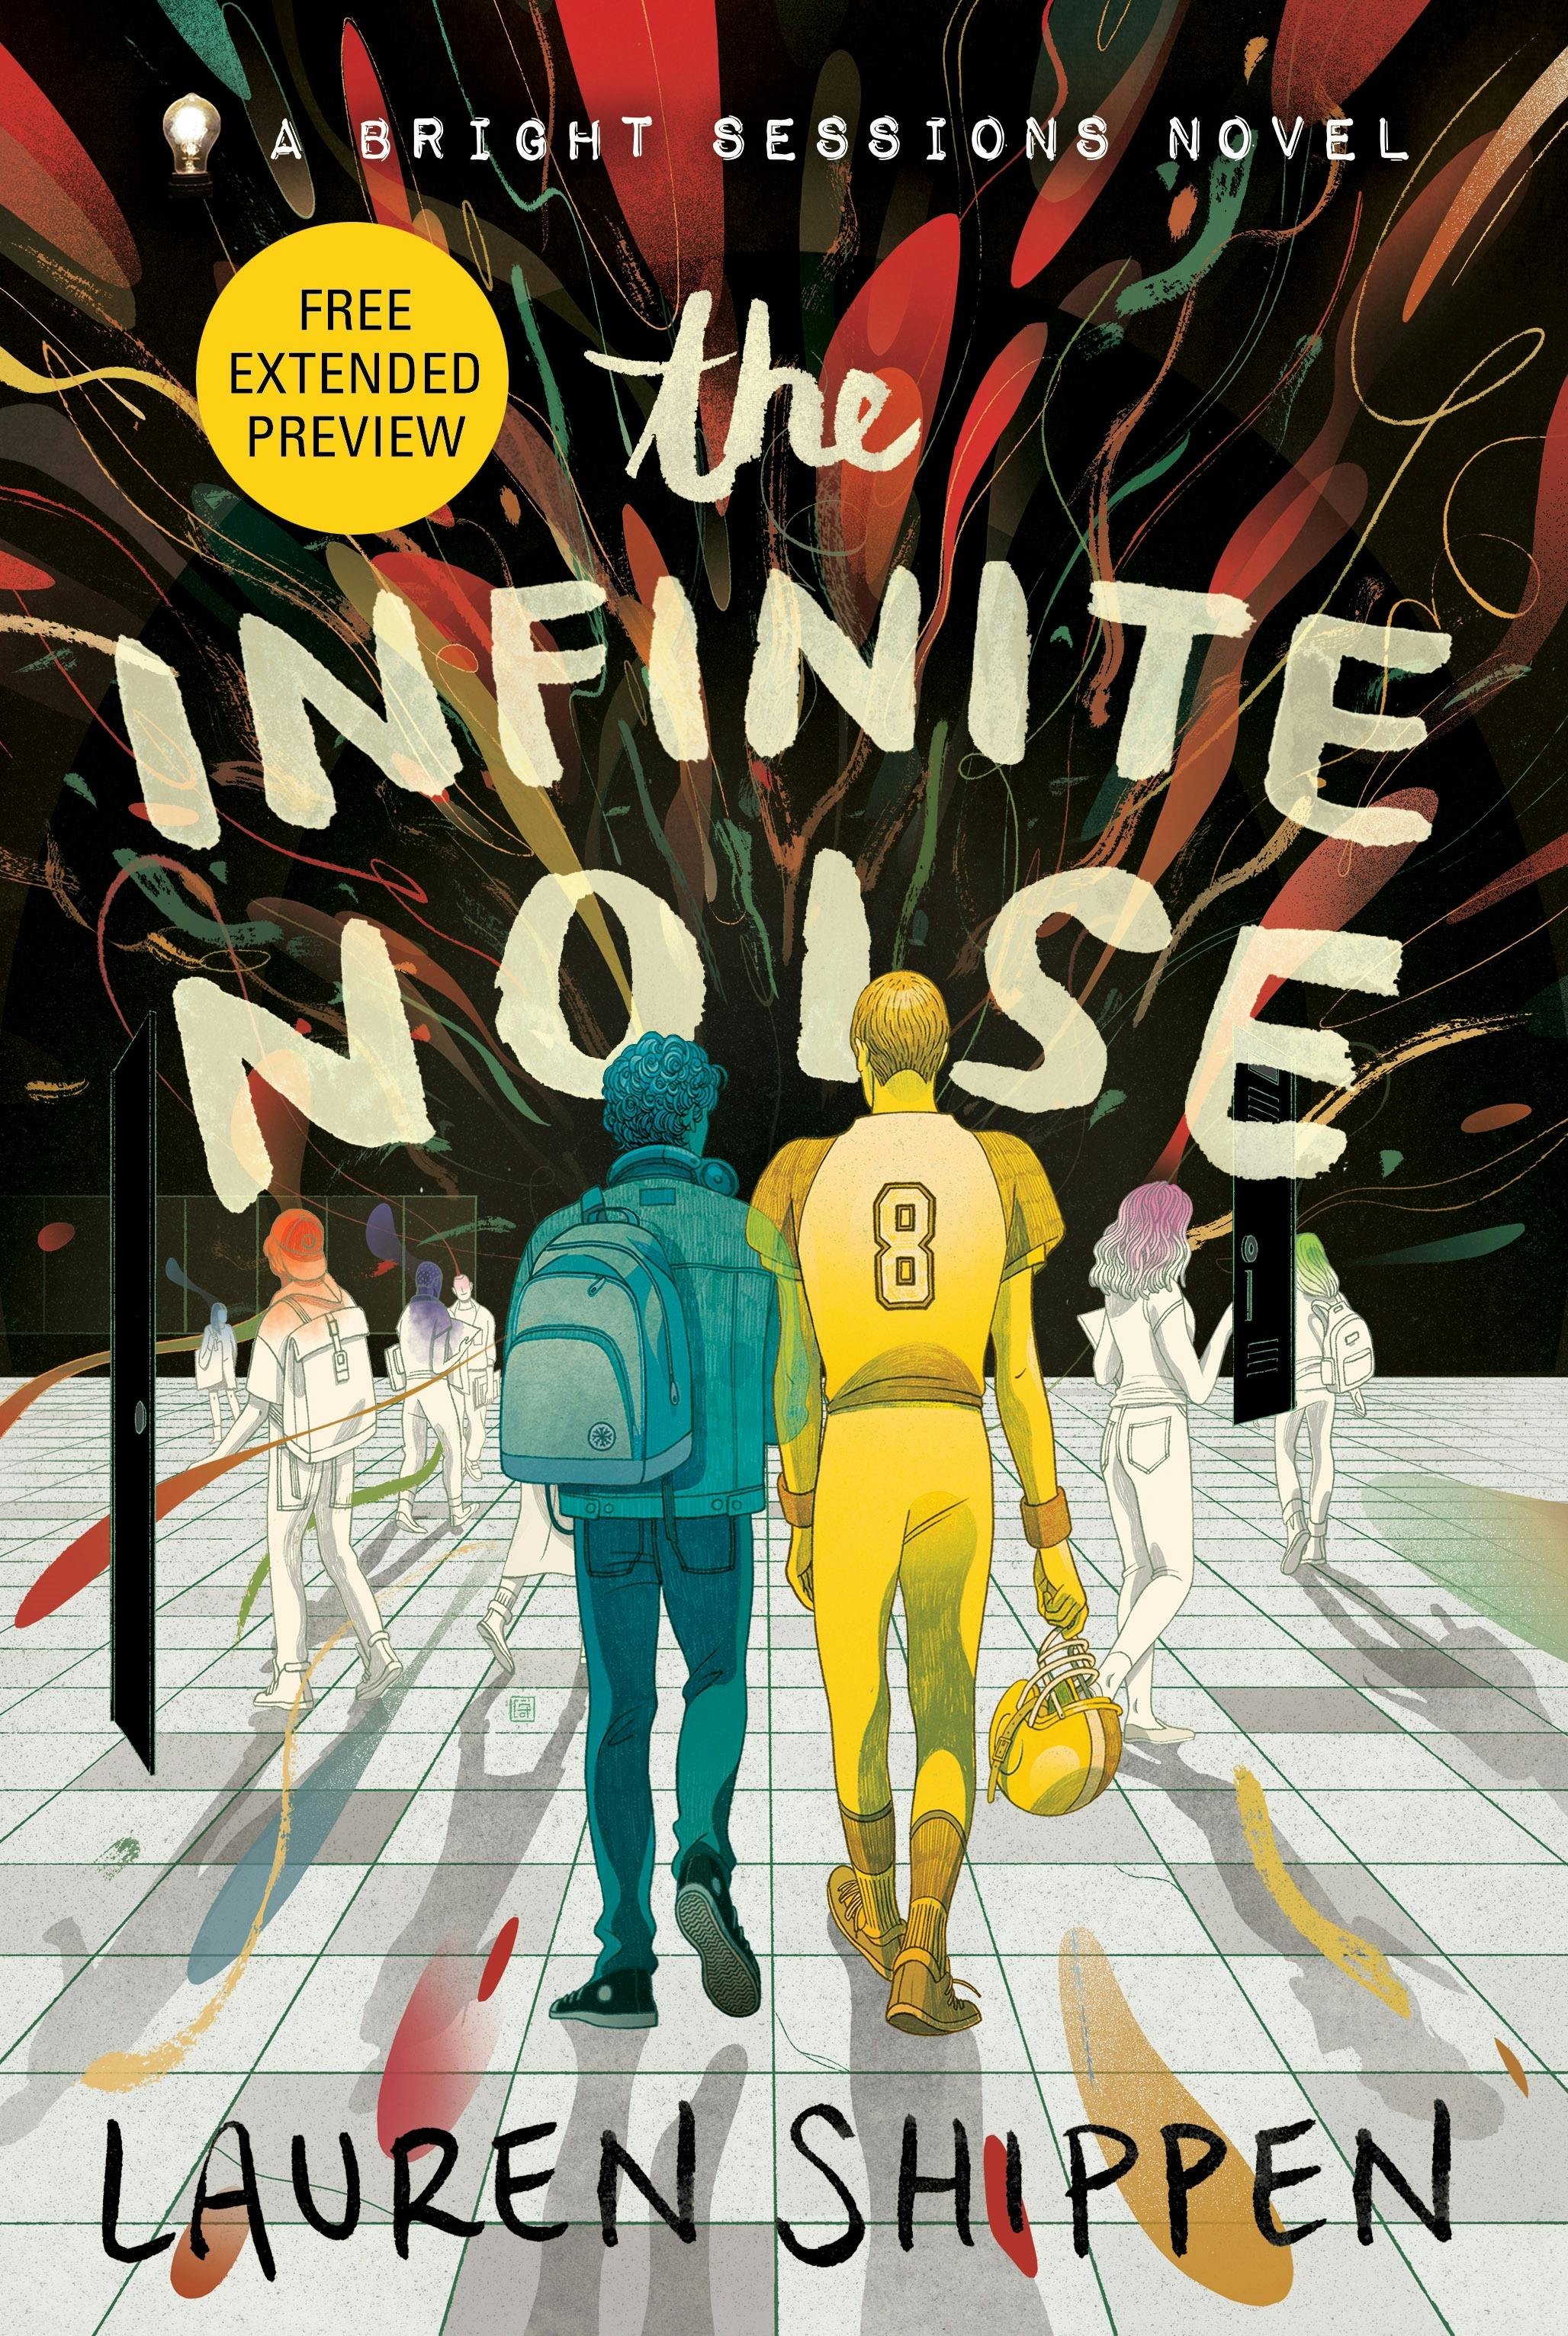 Cover for the book titled as: The Infinite Noise Sneak Peek